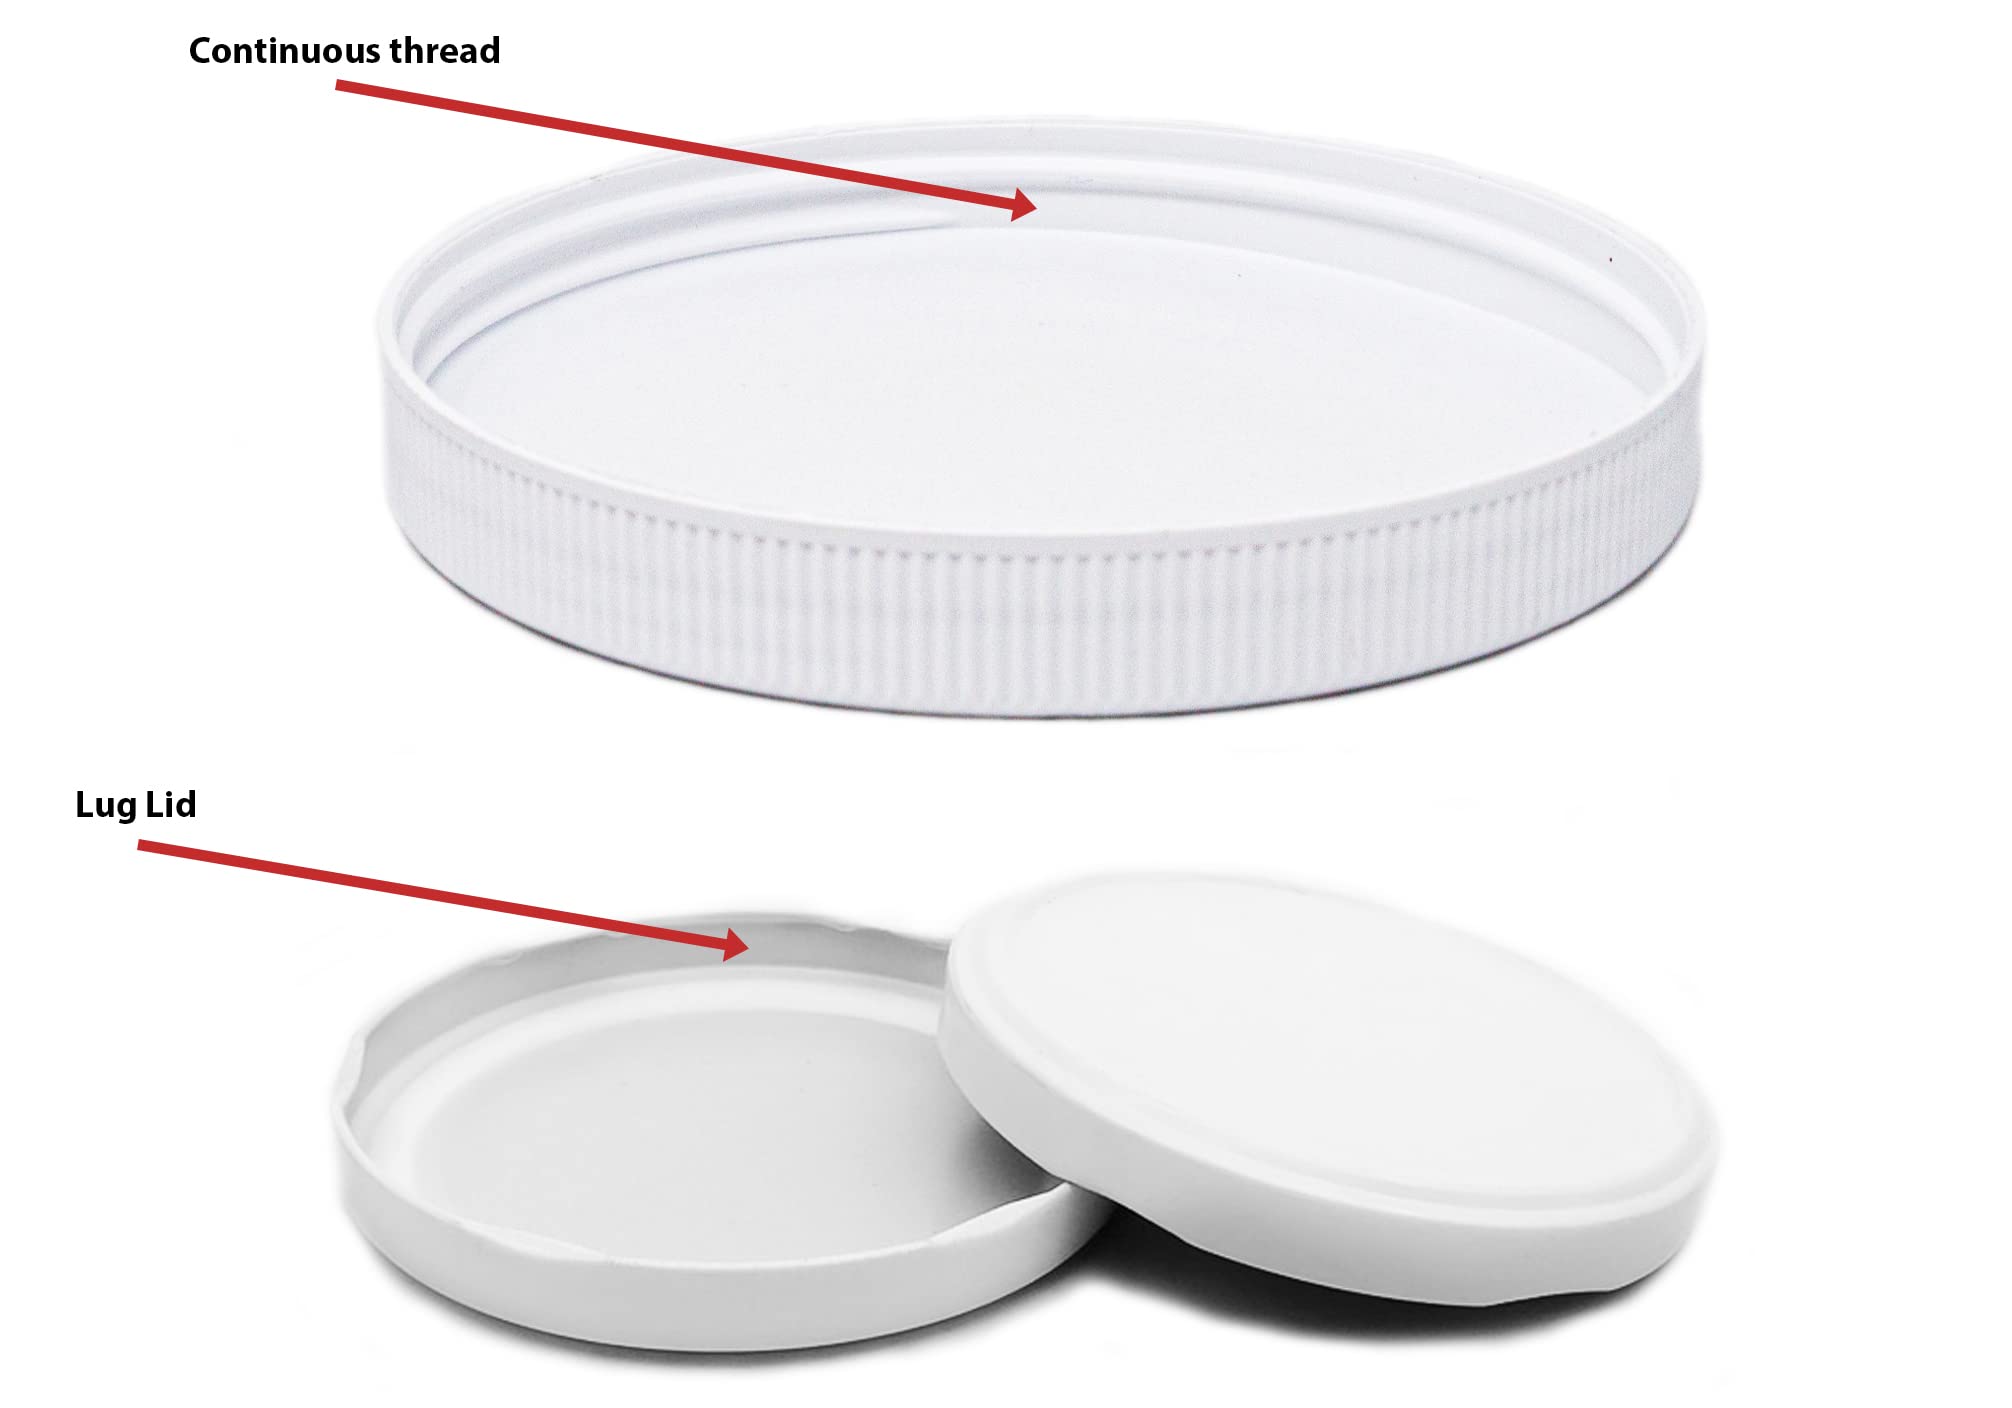 CLEARVIEW CONTAINERS | 110/400 Plastic Replacement Lids | Gallon Jar w/ Leak Proof Liner | For Large Glass or Plastic Wide Mouth Jar | Made in the U.S.A.| Food-Grade Storage Caps for Canning Jars (3)